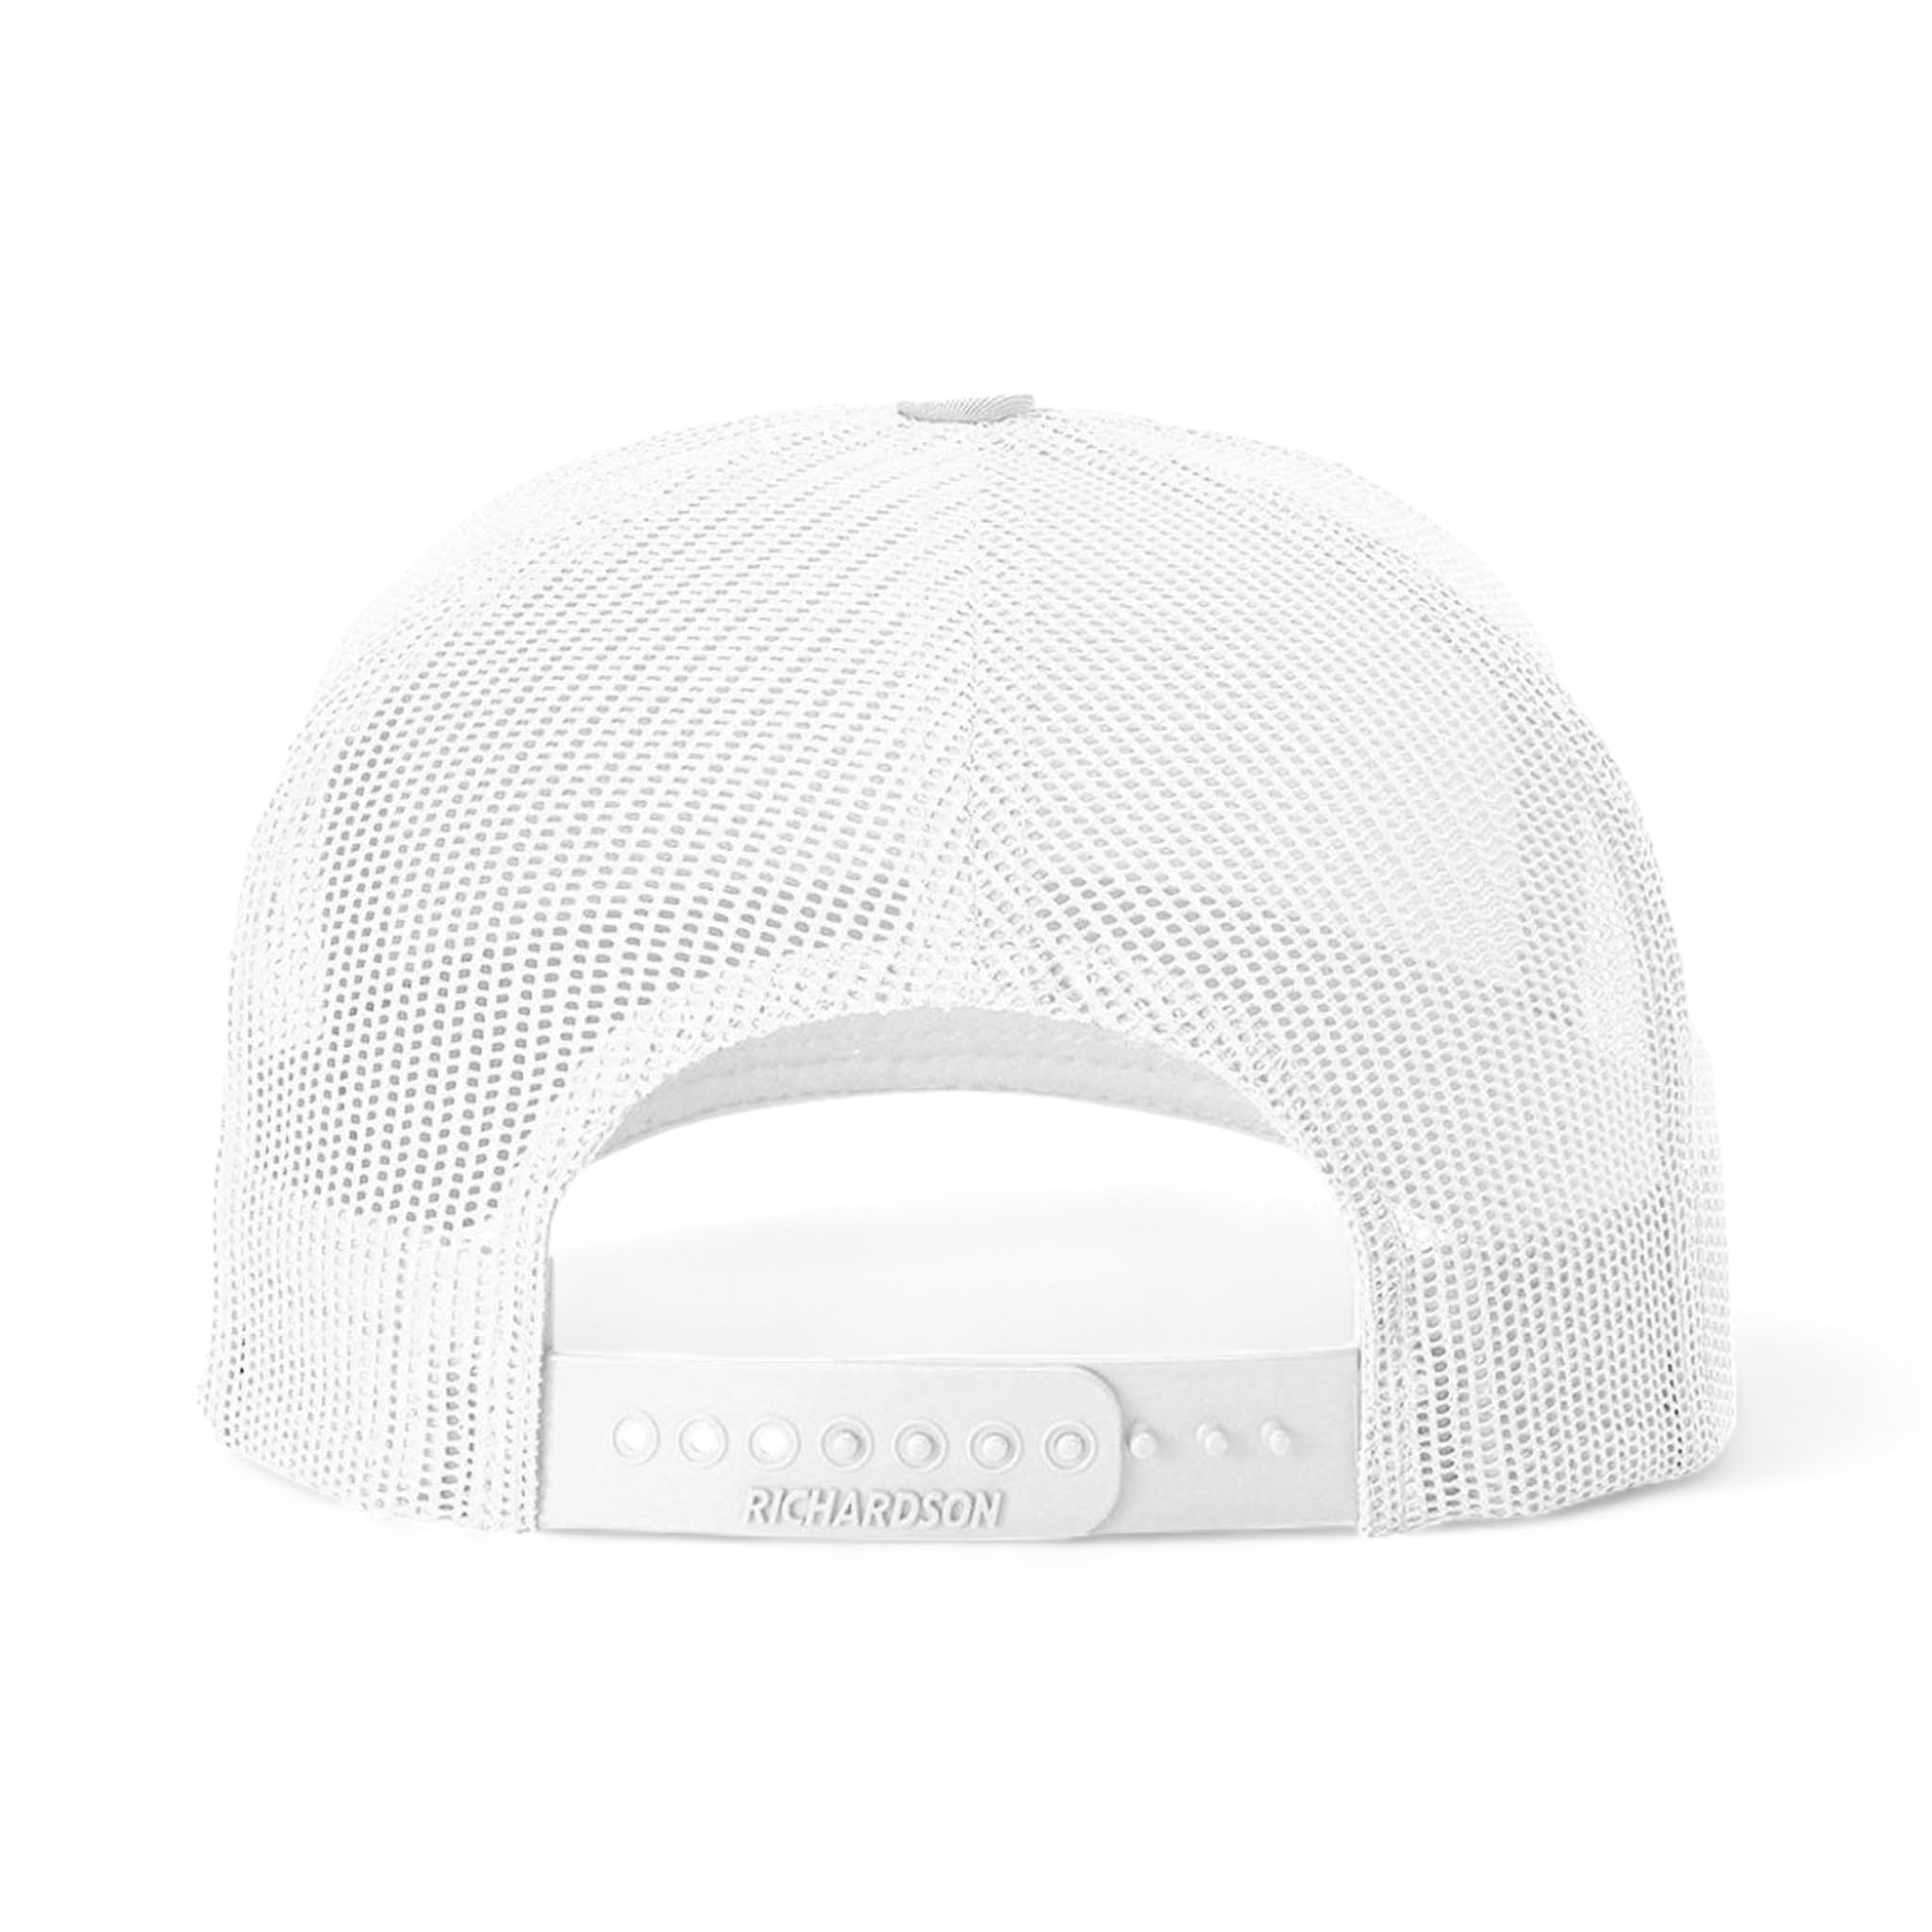 Back view of Richardson 112FPR custom hat in white and navy